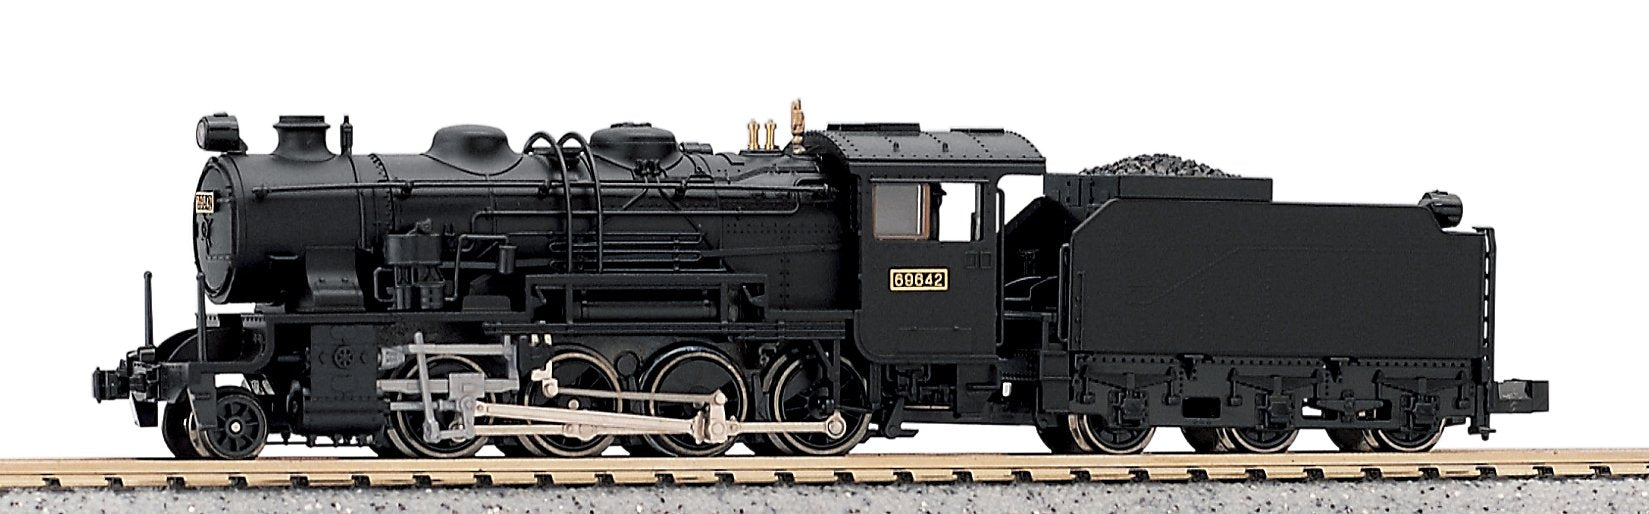 Kato N Gauge 9600 Steam Locomotive - 2014 Railway Model without Differential